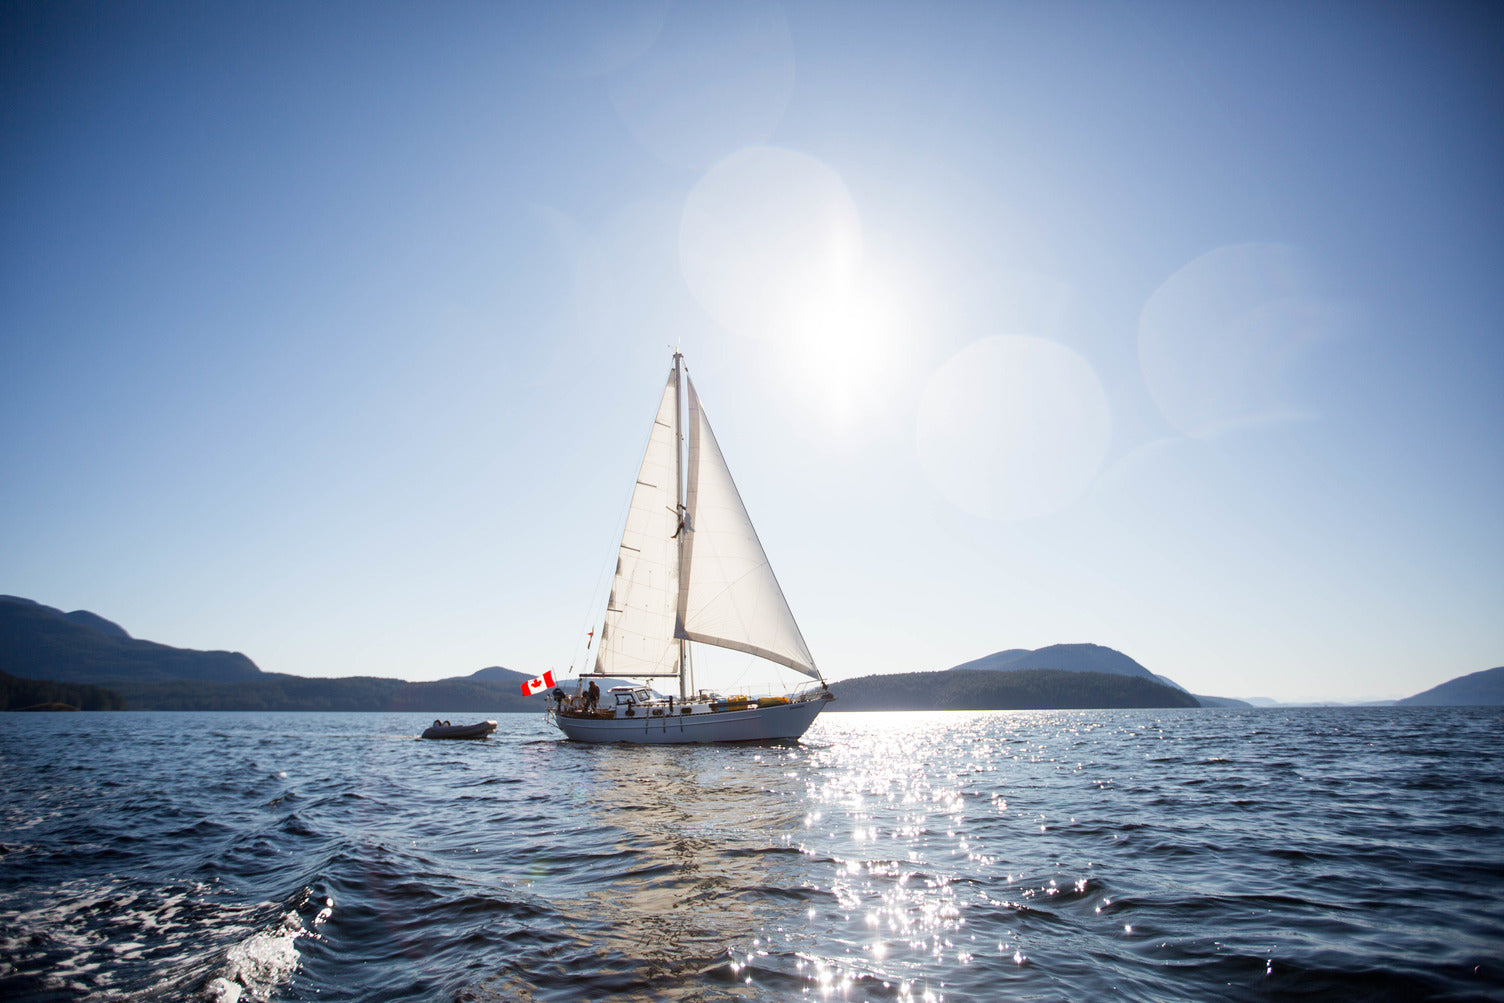 sail boat gliding in BC waters 